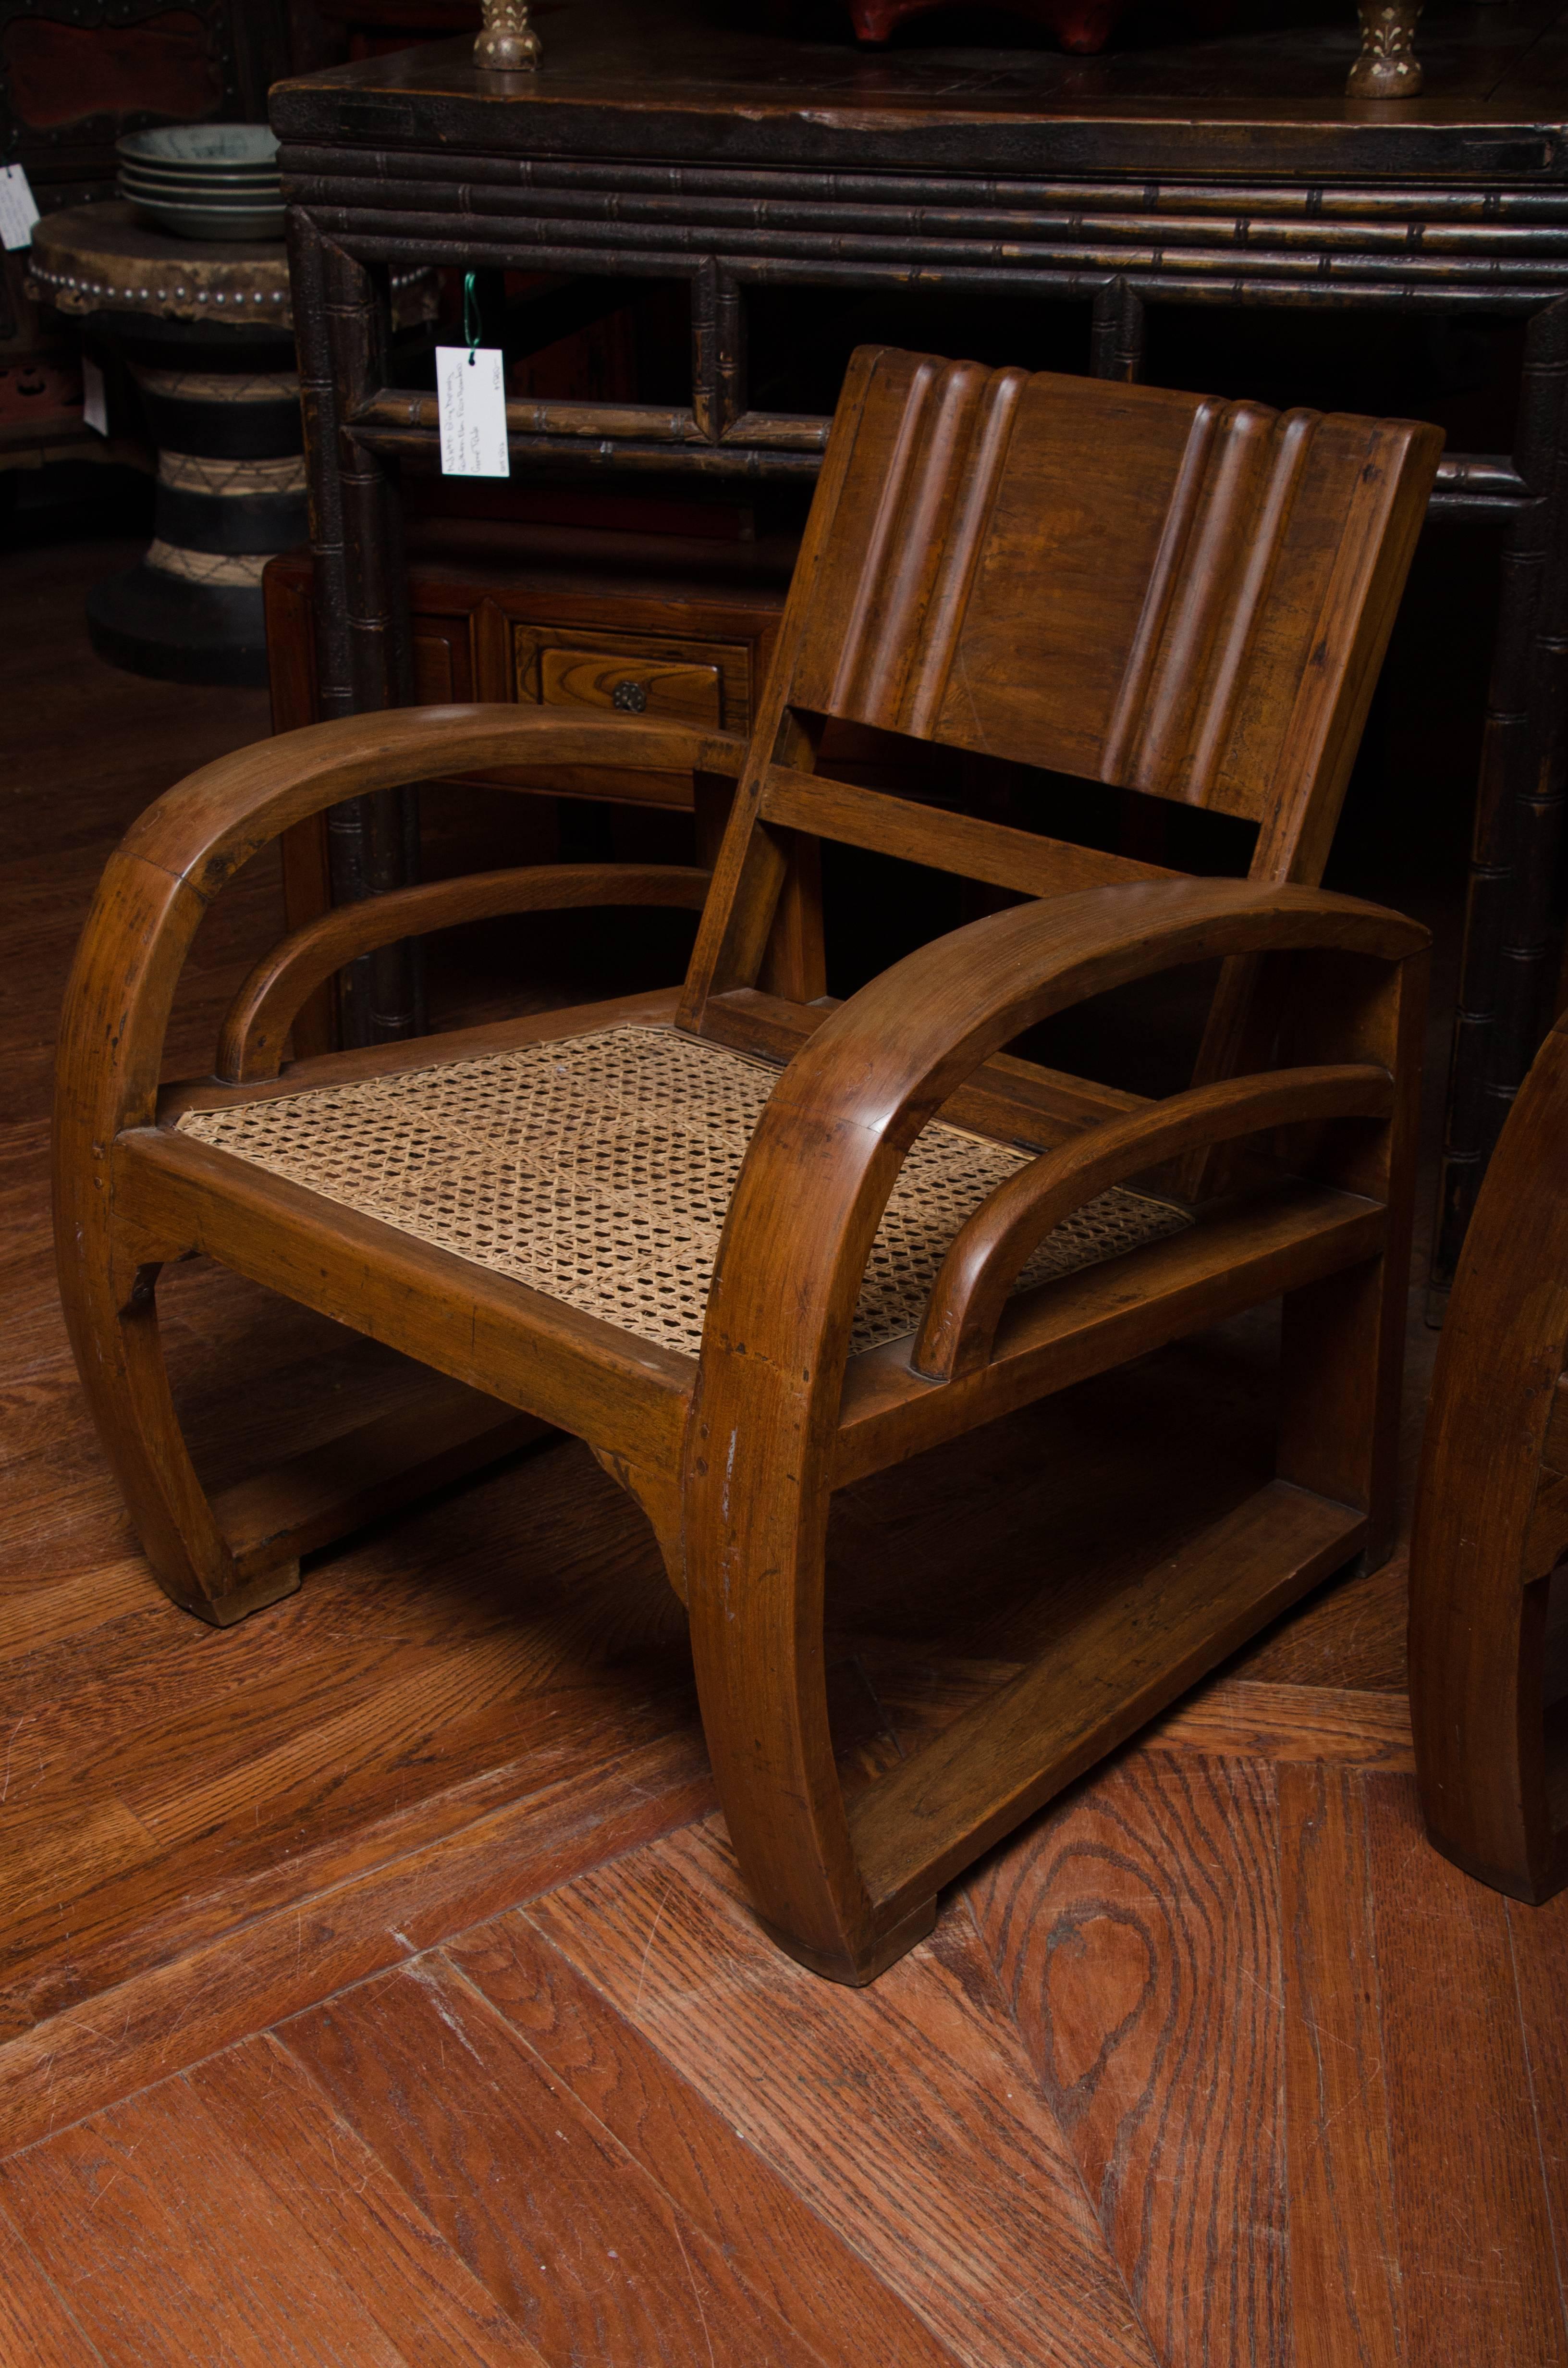 Early 20thC. Indonesian Dutch Colonial Club Chair with Caned Seat and Carved Back ( 2 available, priced and sold separately )